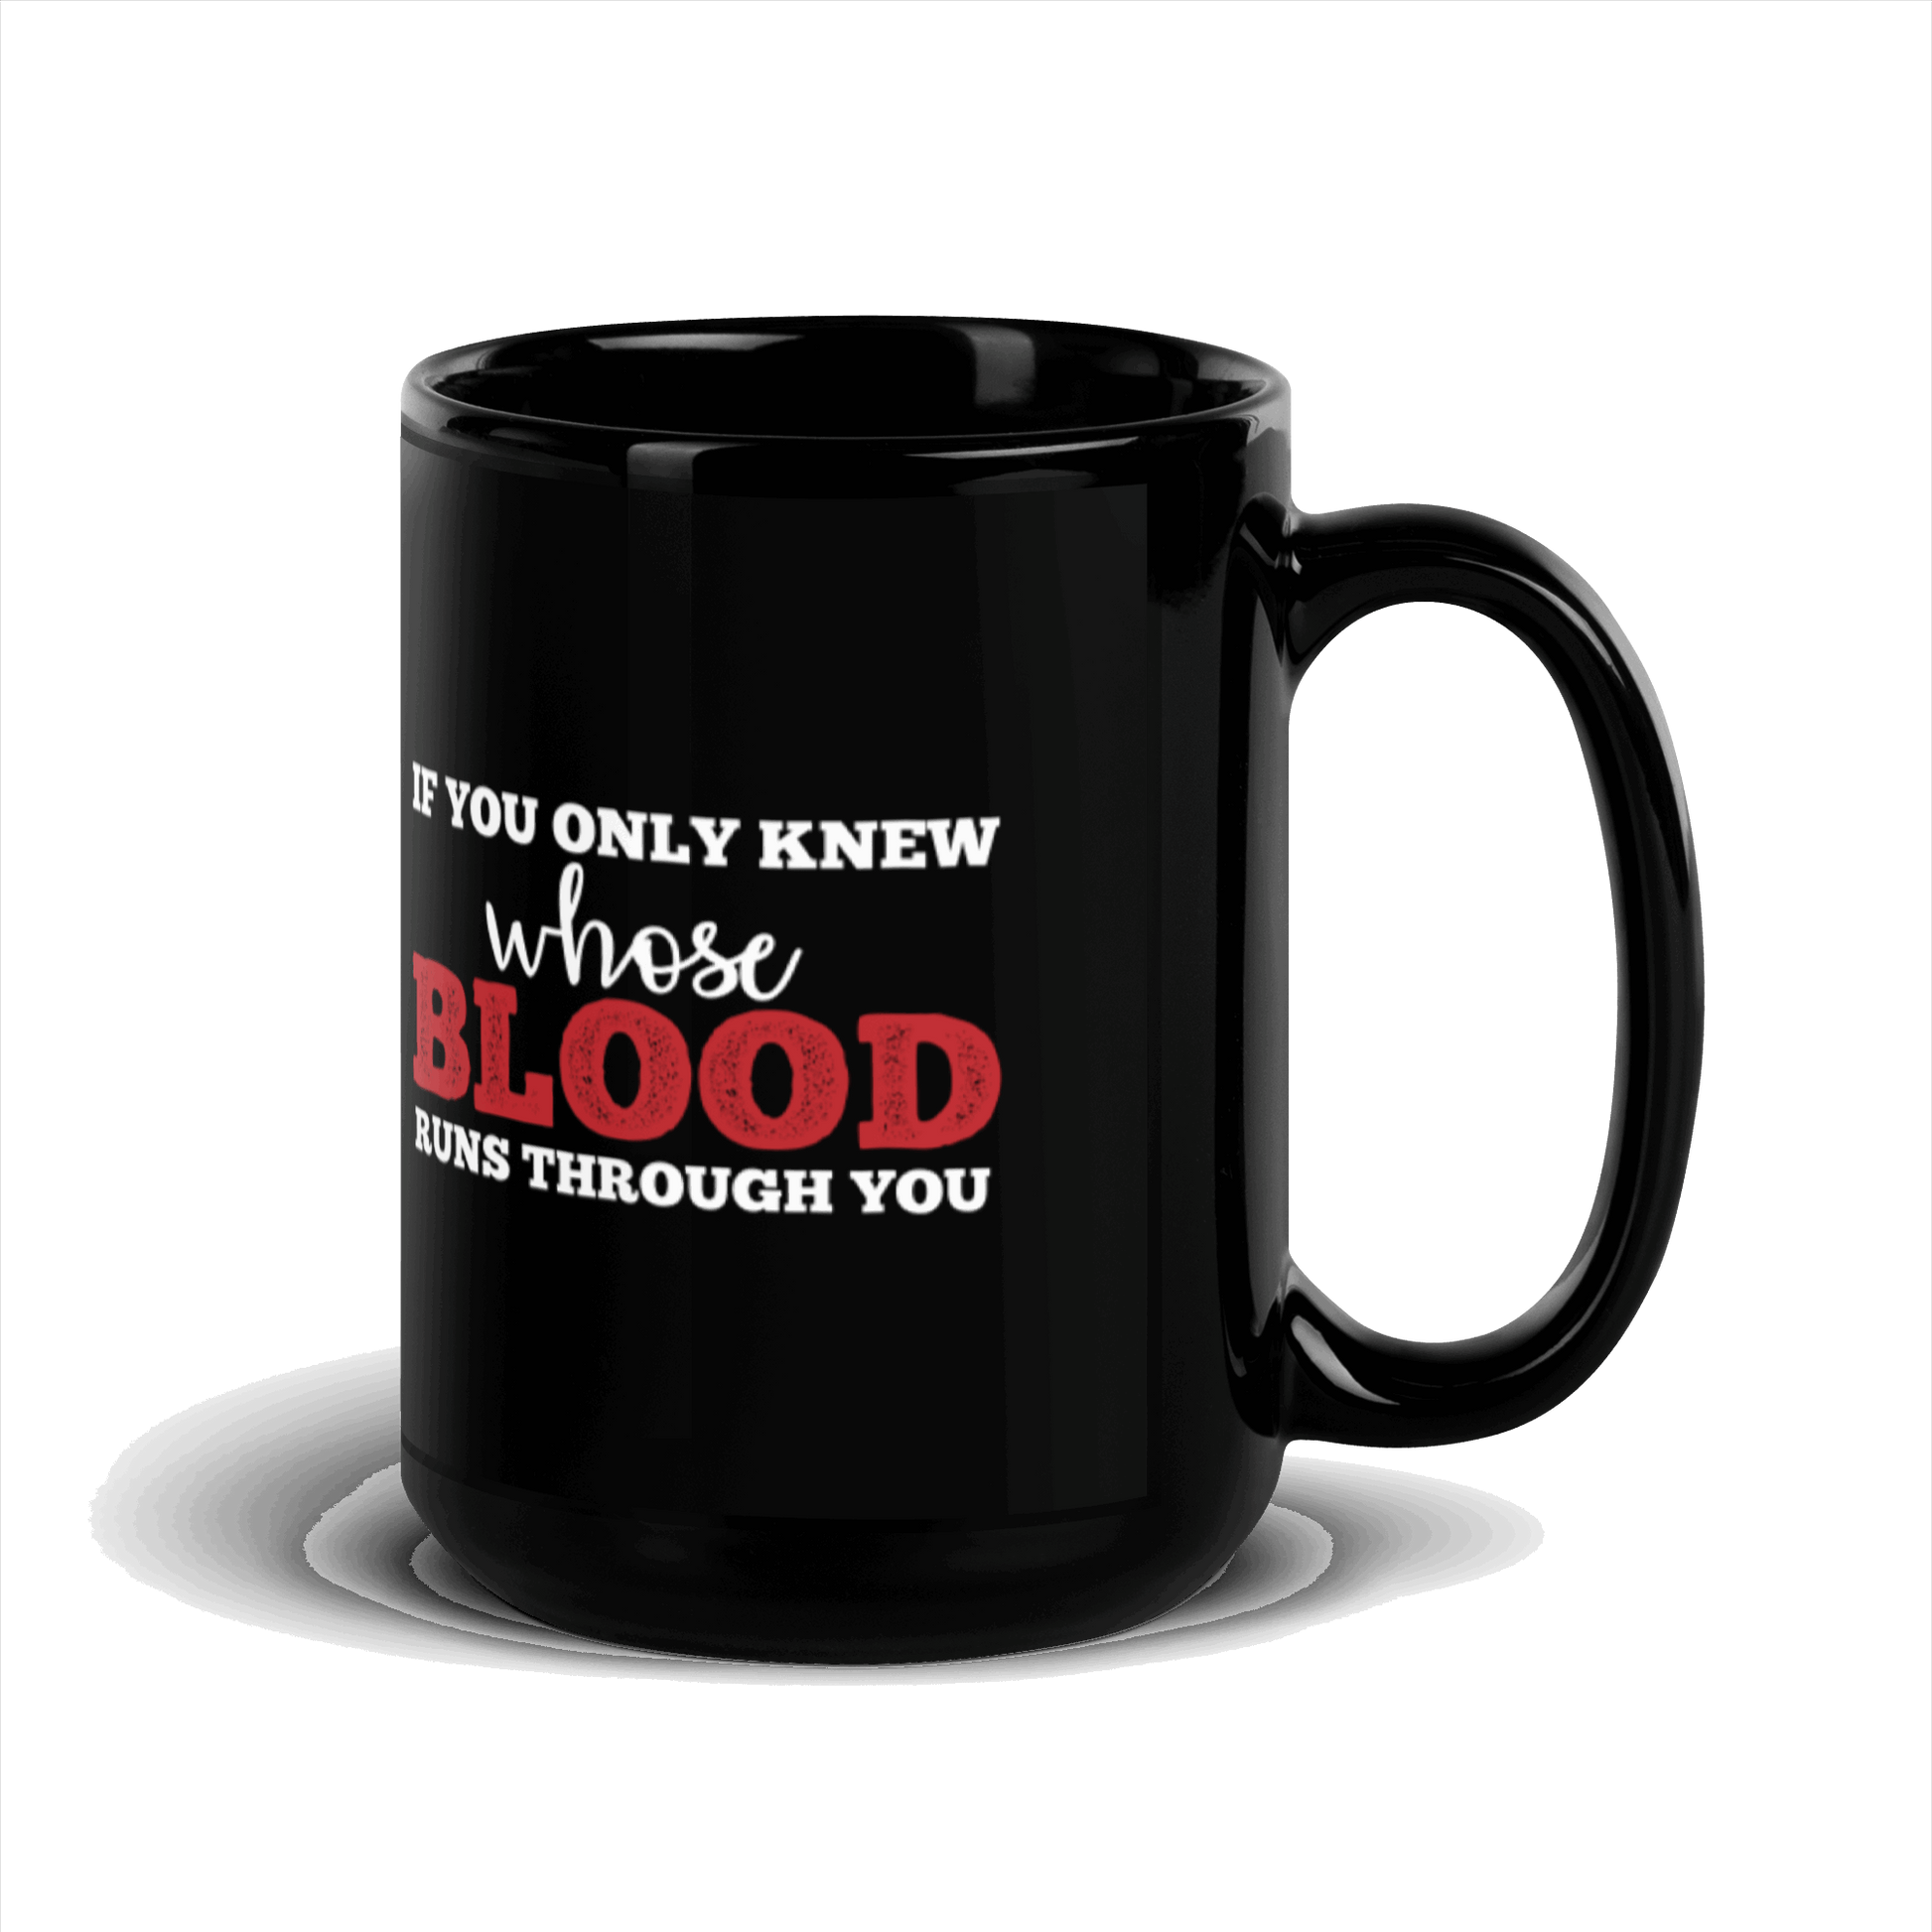 If You Only Knew Whose Blood Runs Through You Black Glossy Mug